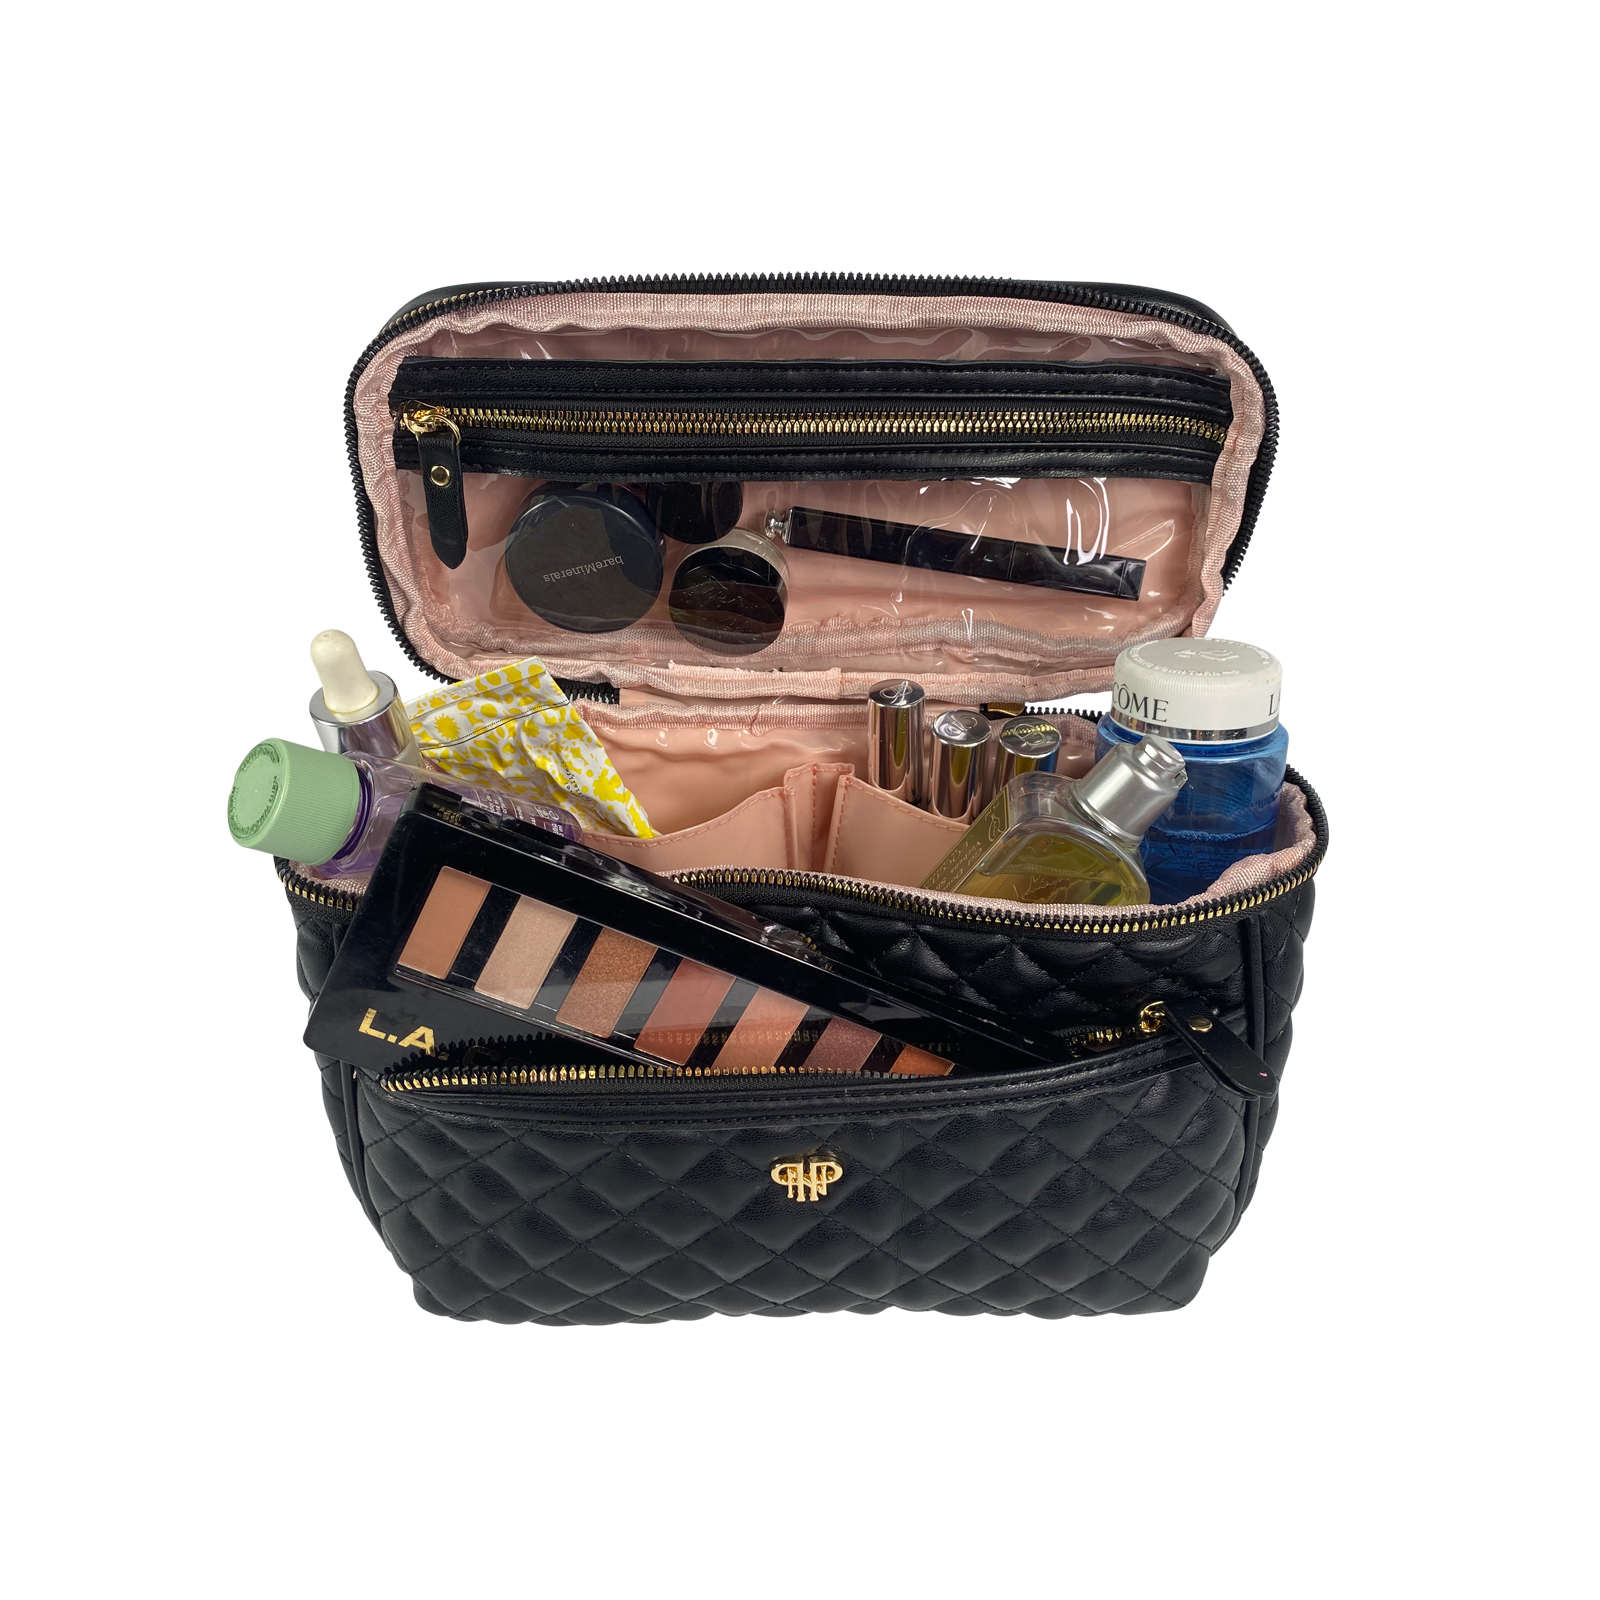 Pursen Classic Train Case - Travel Makeup & Toiletry Case - Navy Quilted